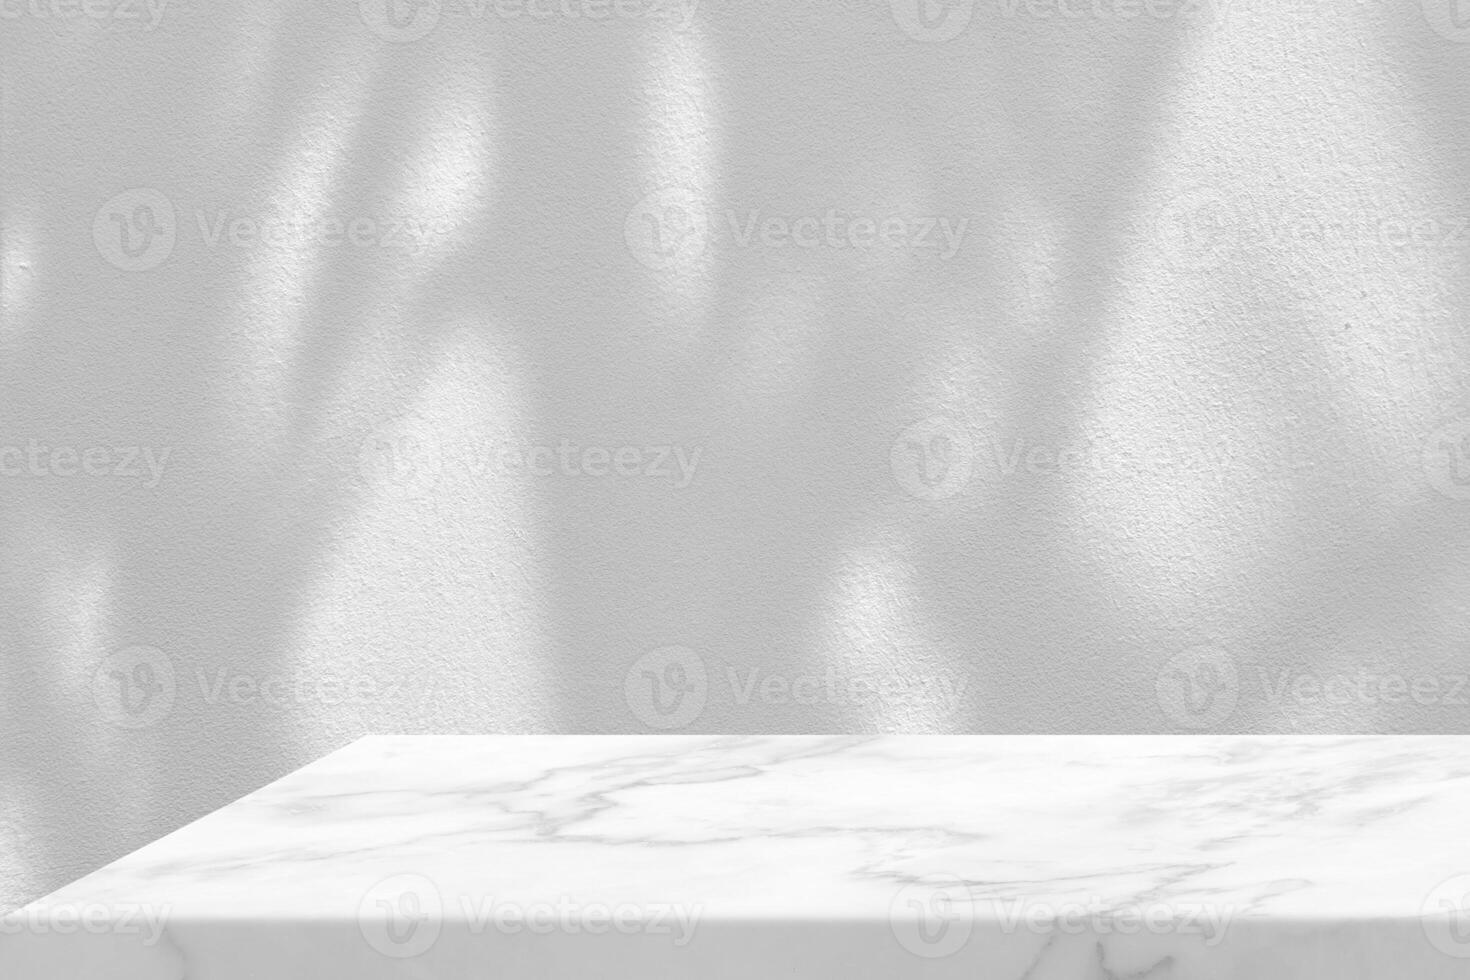 Minimal White Marble Table Corner with Tree Shadow on Concrete Wall Background, Suitable for Product Presentation Backdrop, Display, and Mock up. photo